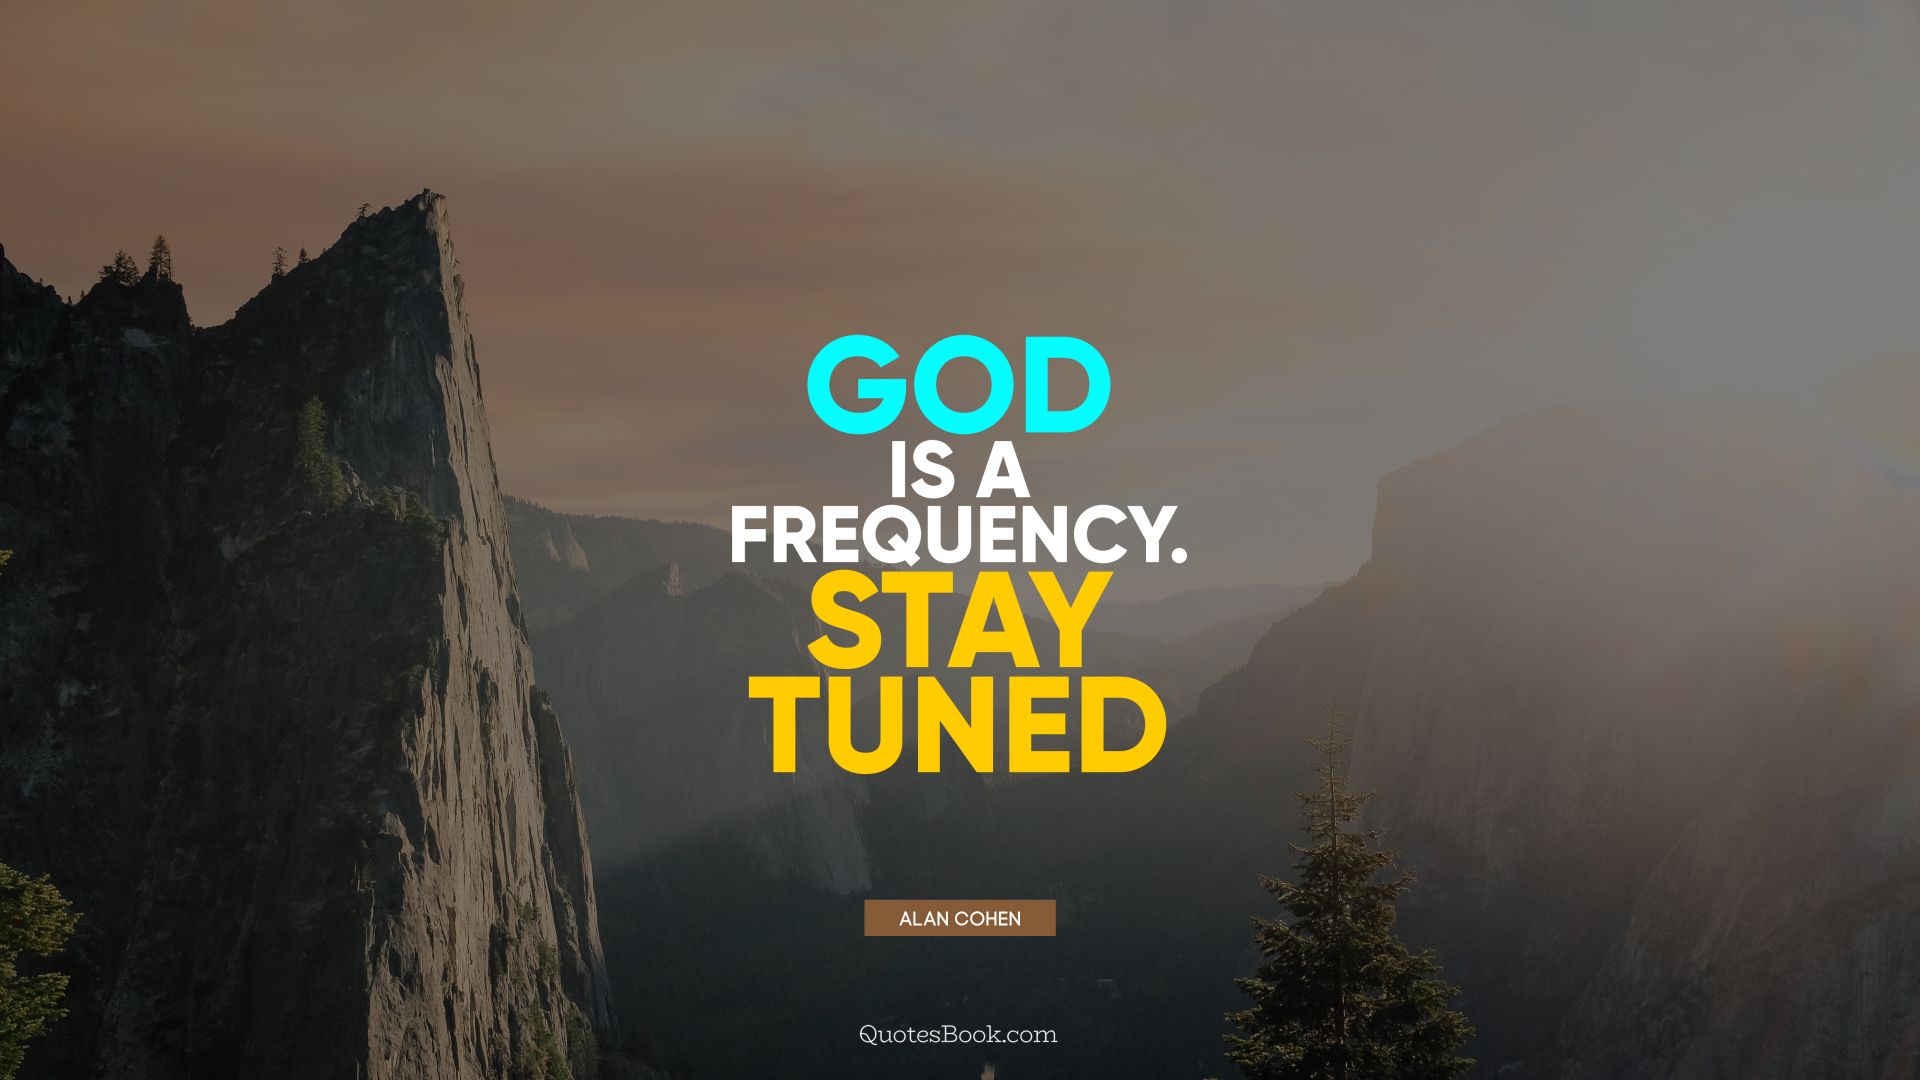 God is a frequency. Stay tuned. - Quote by Alan Cohen